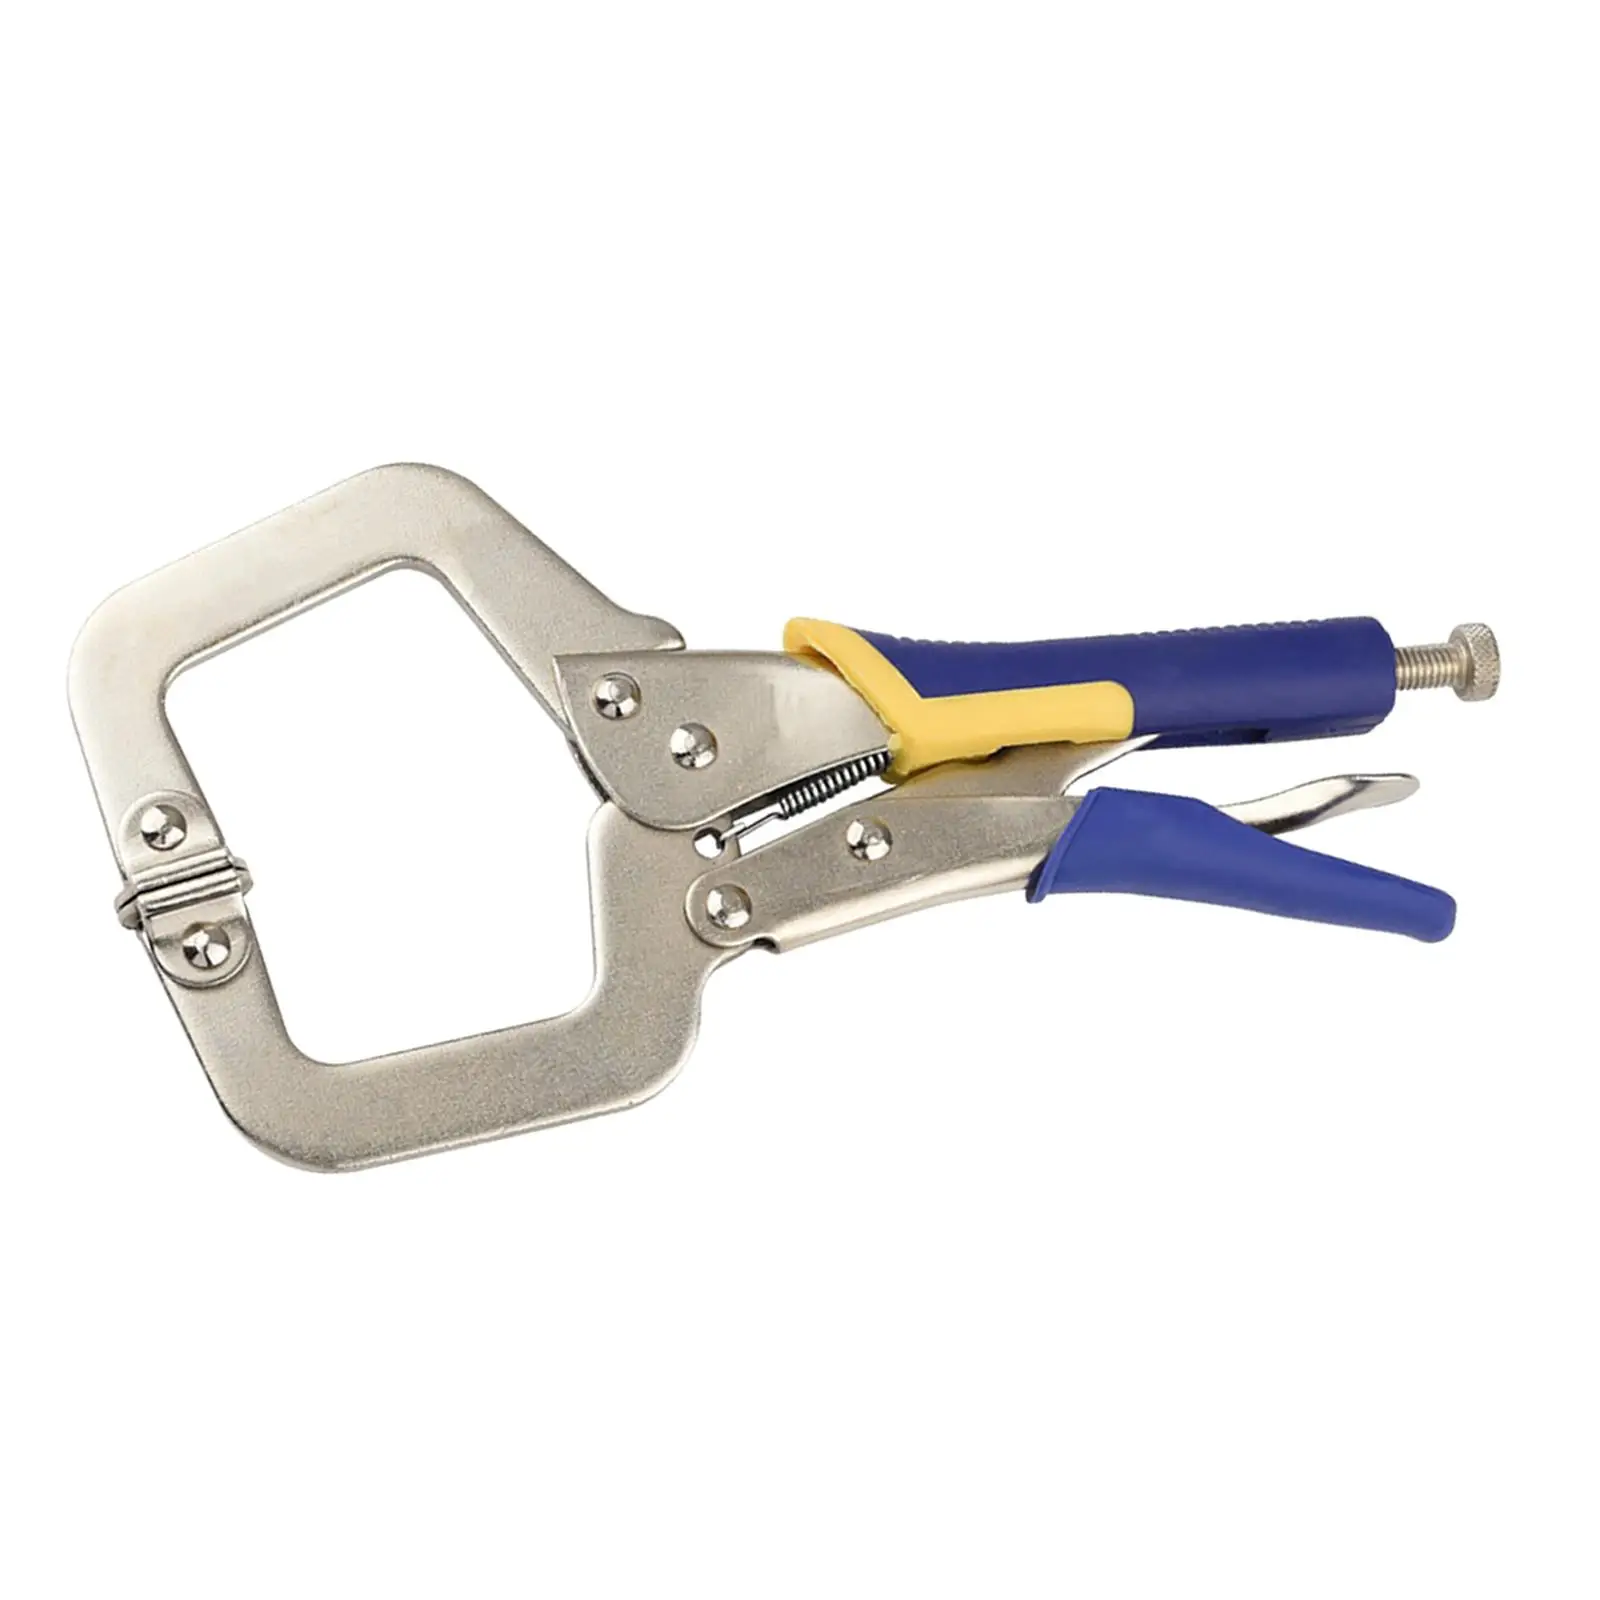 Locking C Clamp Heavy Duty, Adjustable Opening Face C Clamp, Locking Plier Tool for Craftsmen Carpentry Home Welding